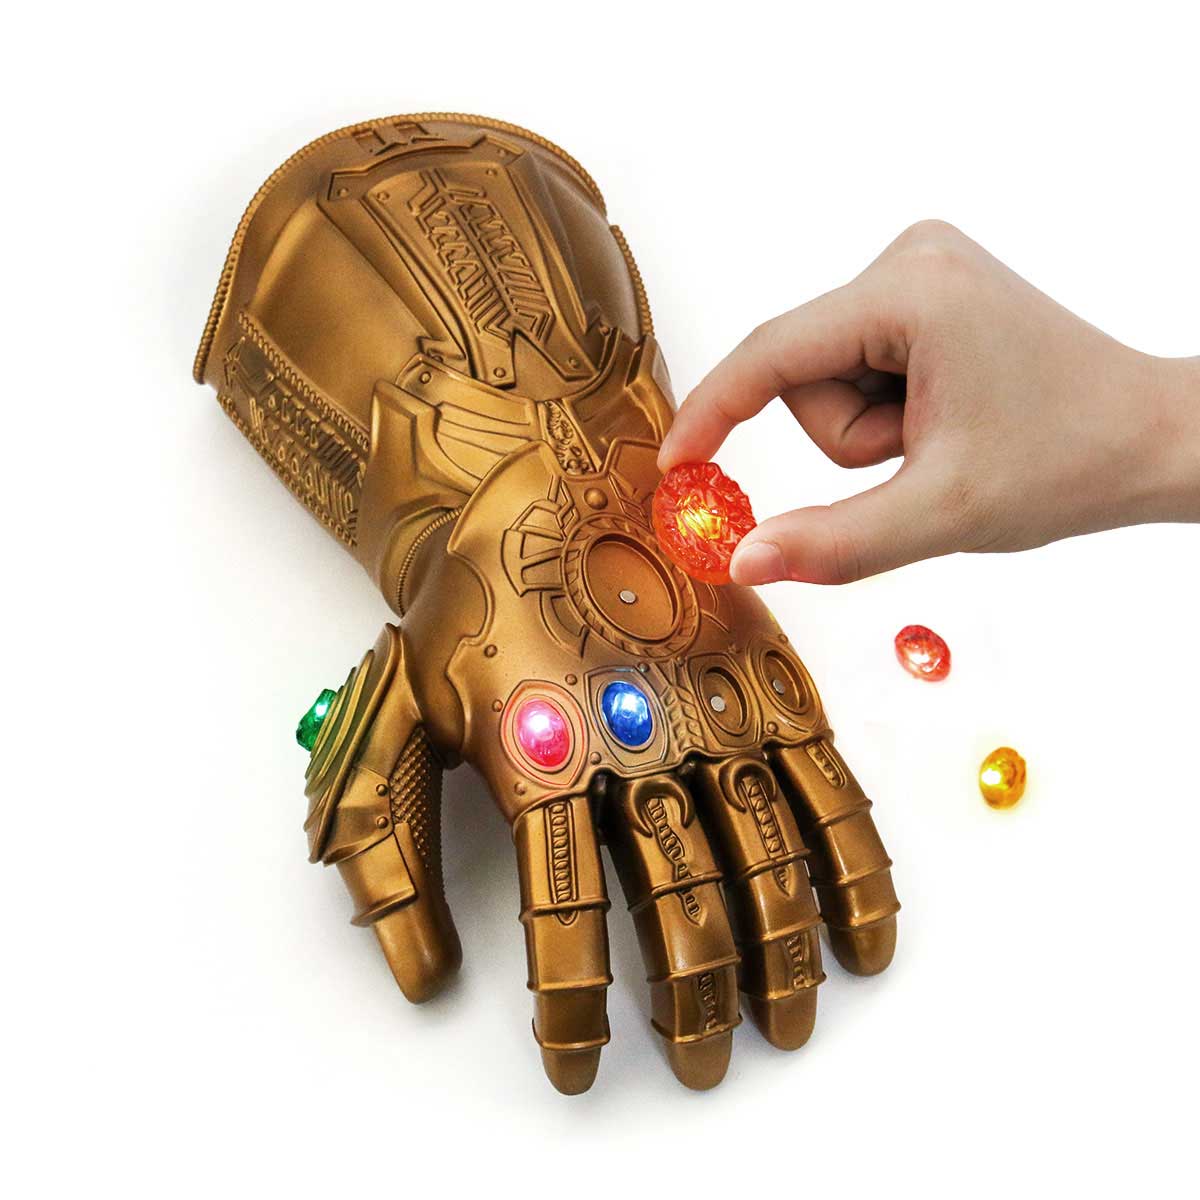 Avengers Infinity War Thanos Led Guanto Guanto con pietre –  : Costumi Cosplay, Anime Cosplay, Negozio Di Cosplay,  Costumi Cosplay Economici